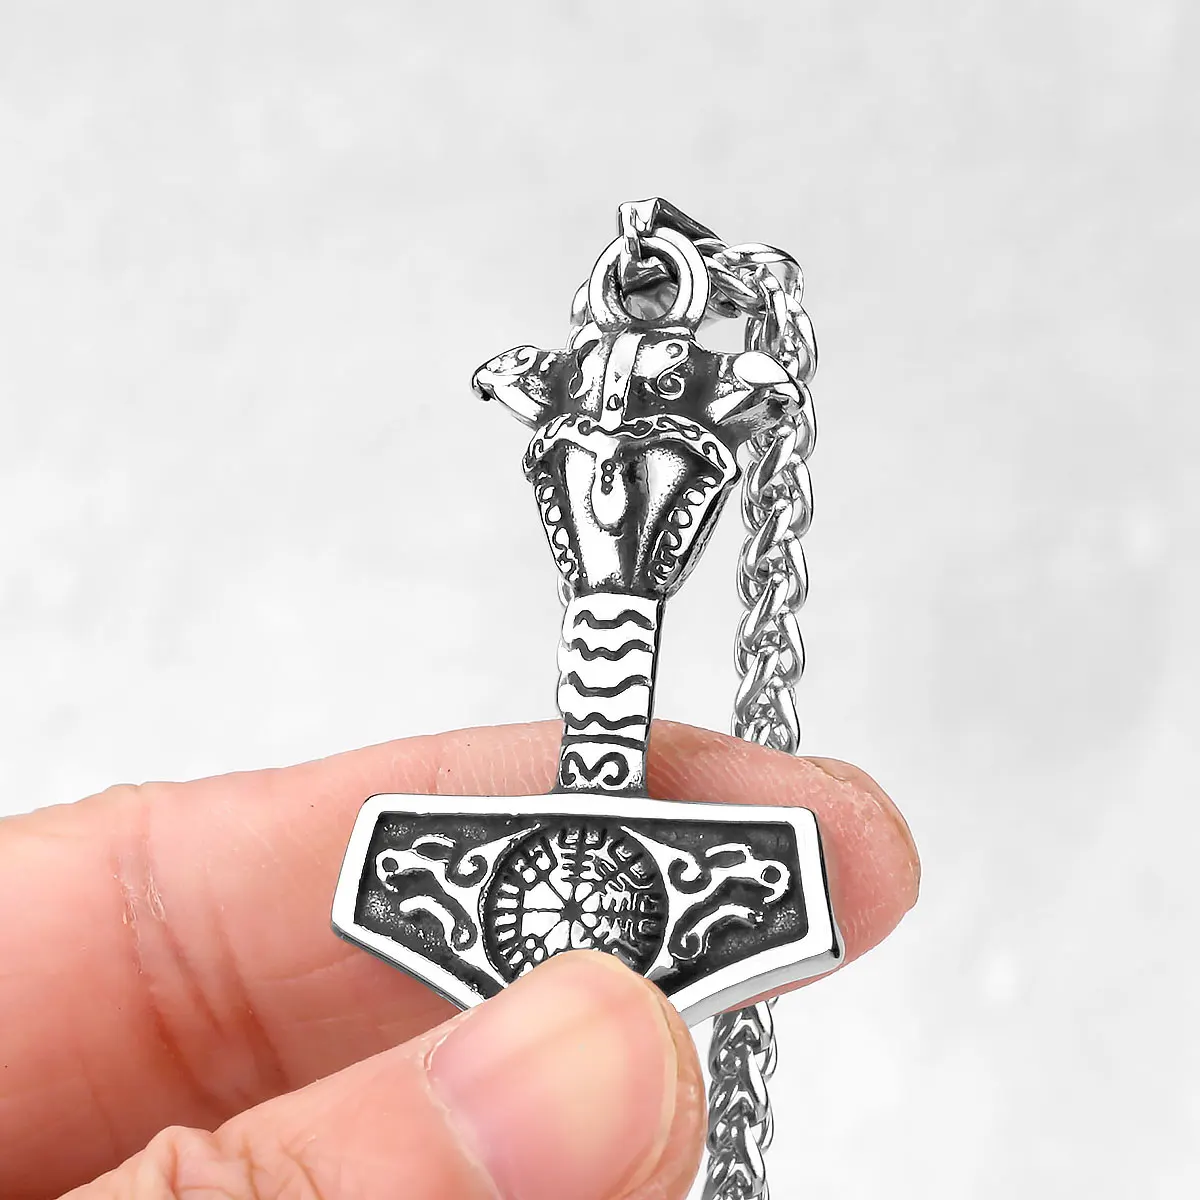 

Norse Vikings Thor's Hammer Mjolnir Compass Rune Amulet Necklace Stainless Steel Chain Vegvisir Anchor Pendant Male Jewelry Gift